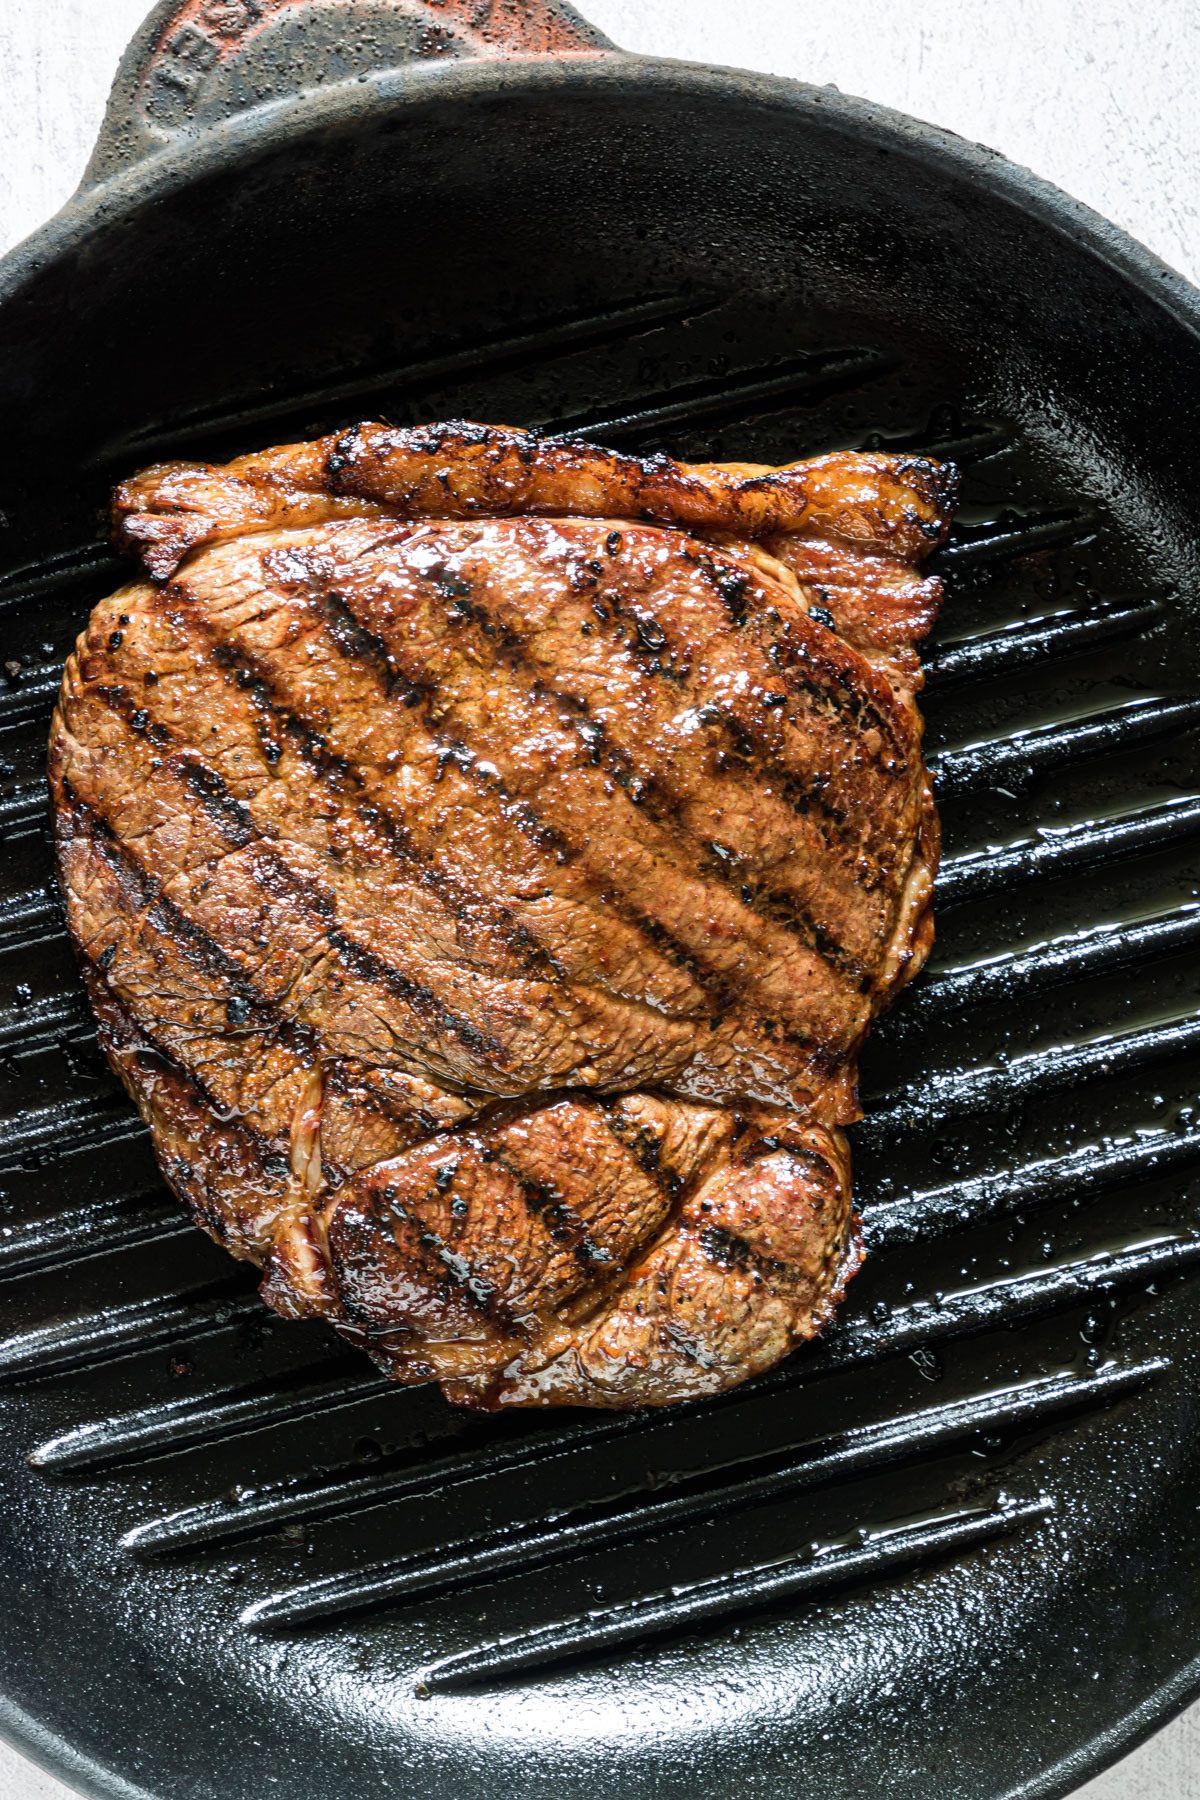 Close up of a juicy grilled steak on a griddle pan.